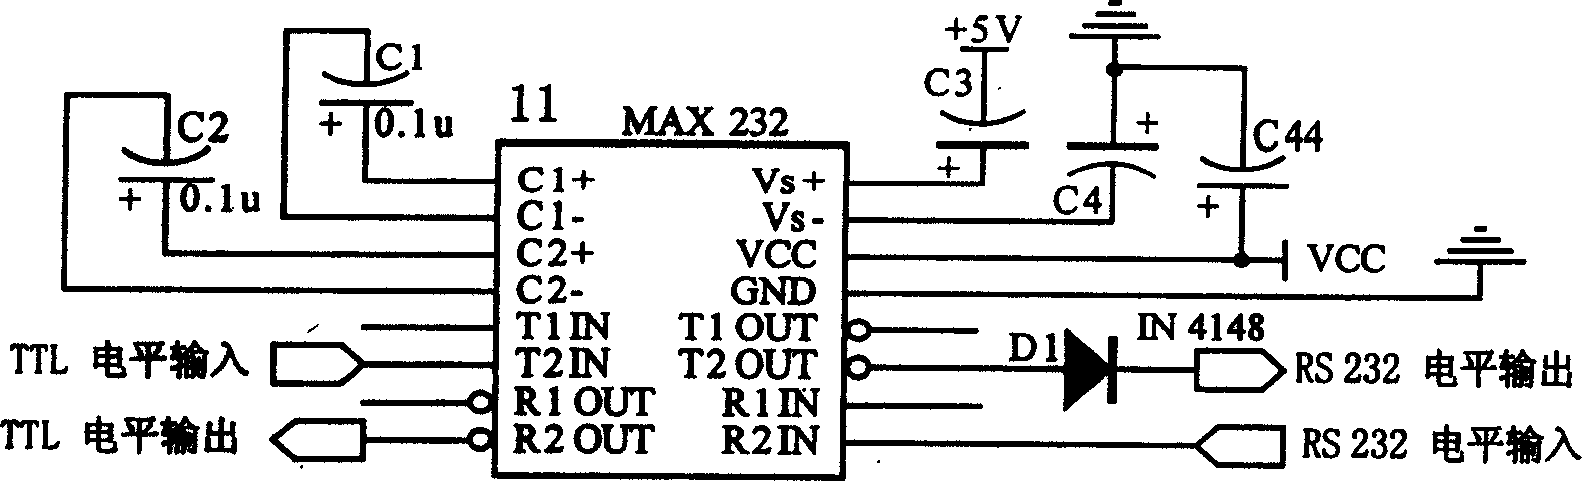 Multishaft motion control card based on RS-232 serial bus